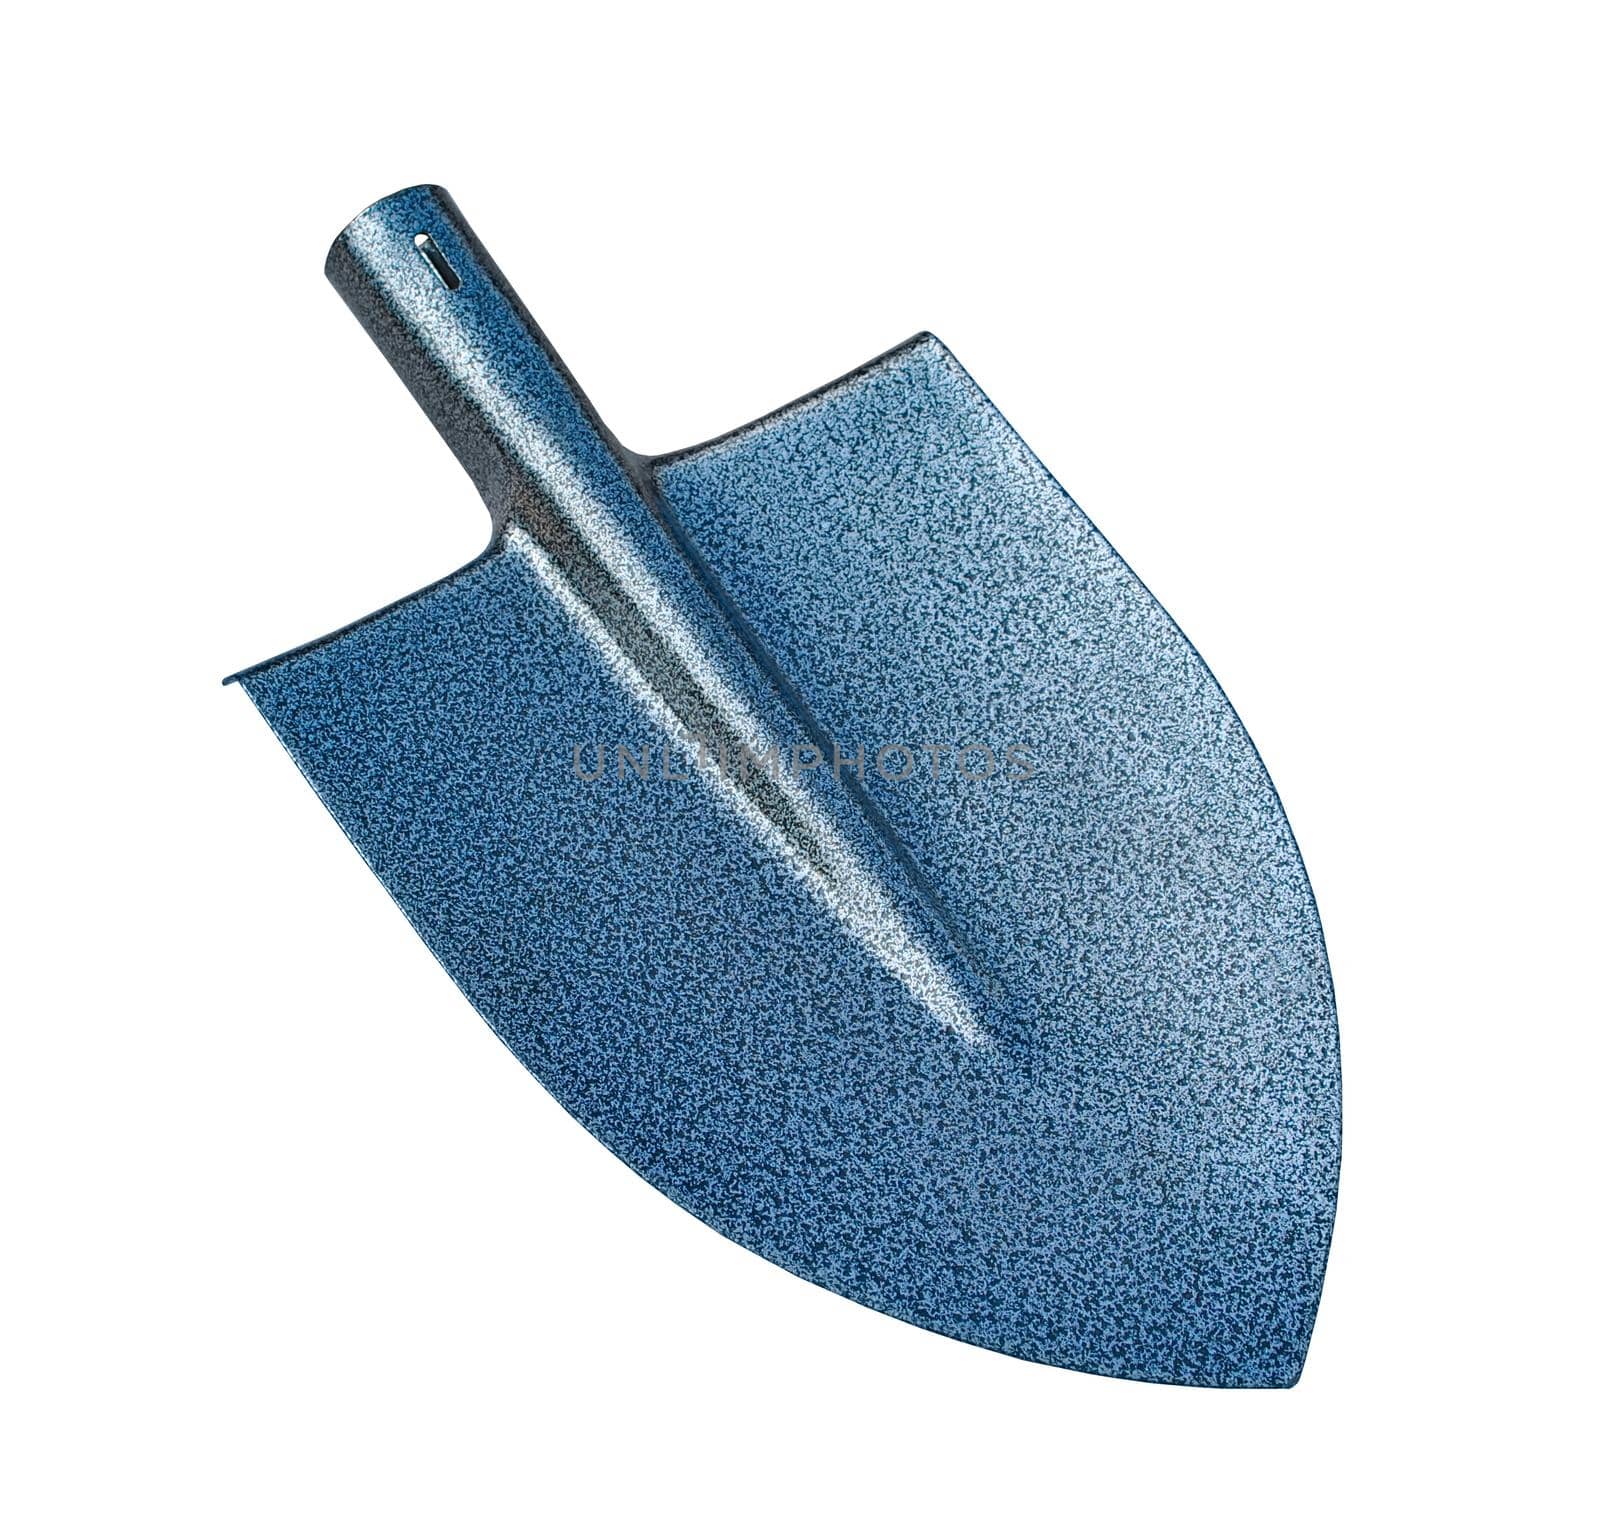 New garden hammer painted shovel. Shovel Spade close-up isolated on a white background. Hammer paint by mtx